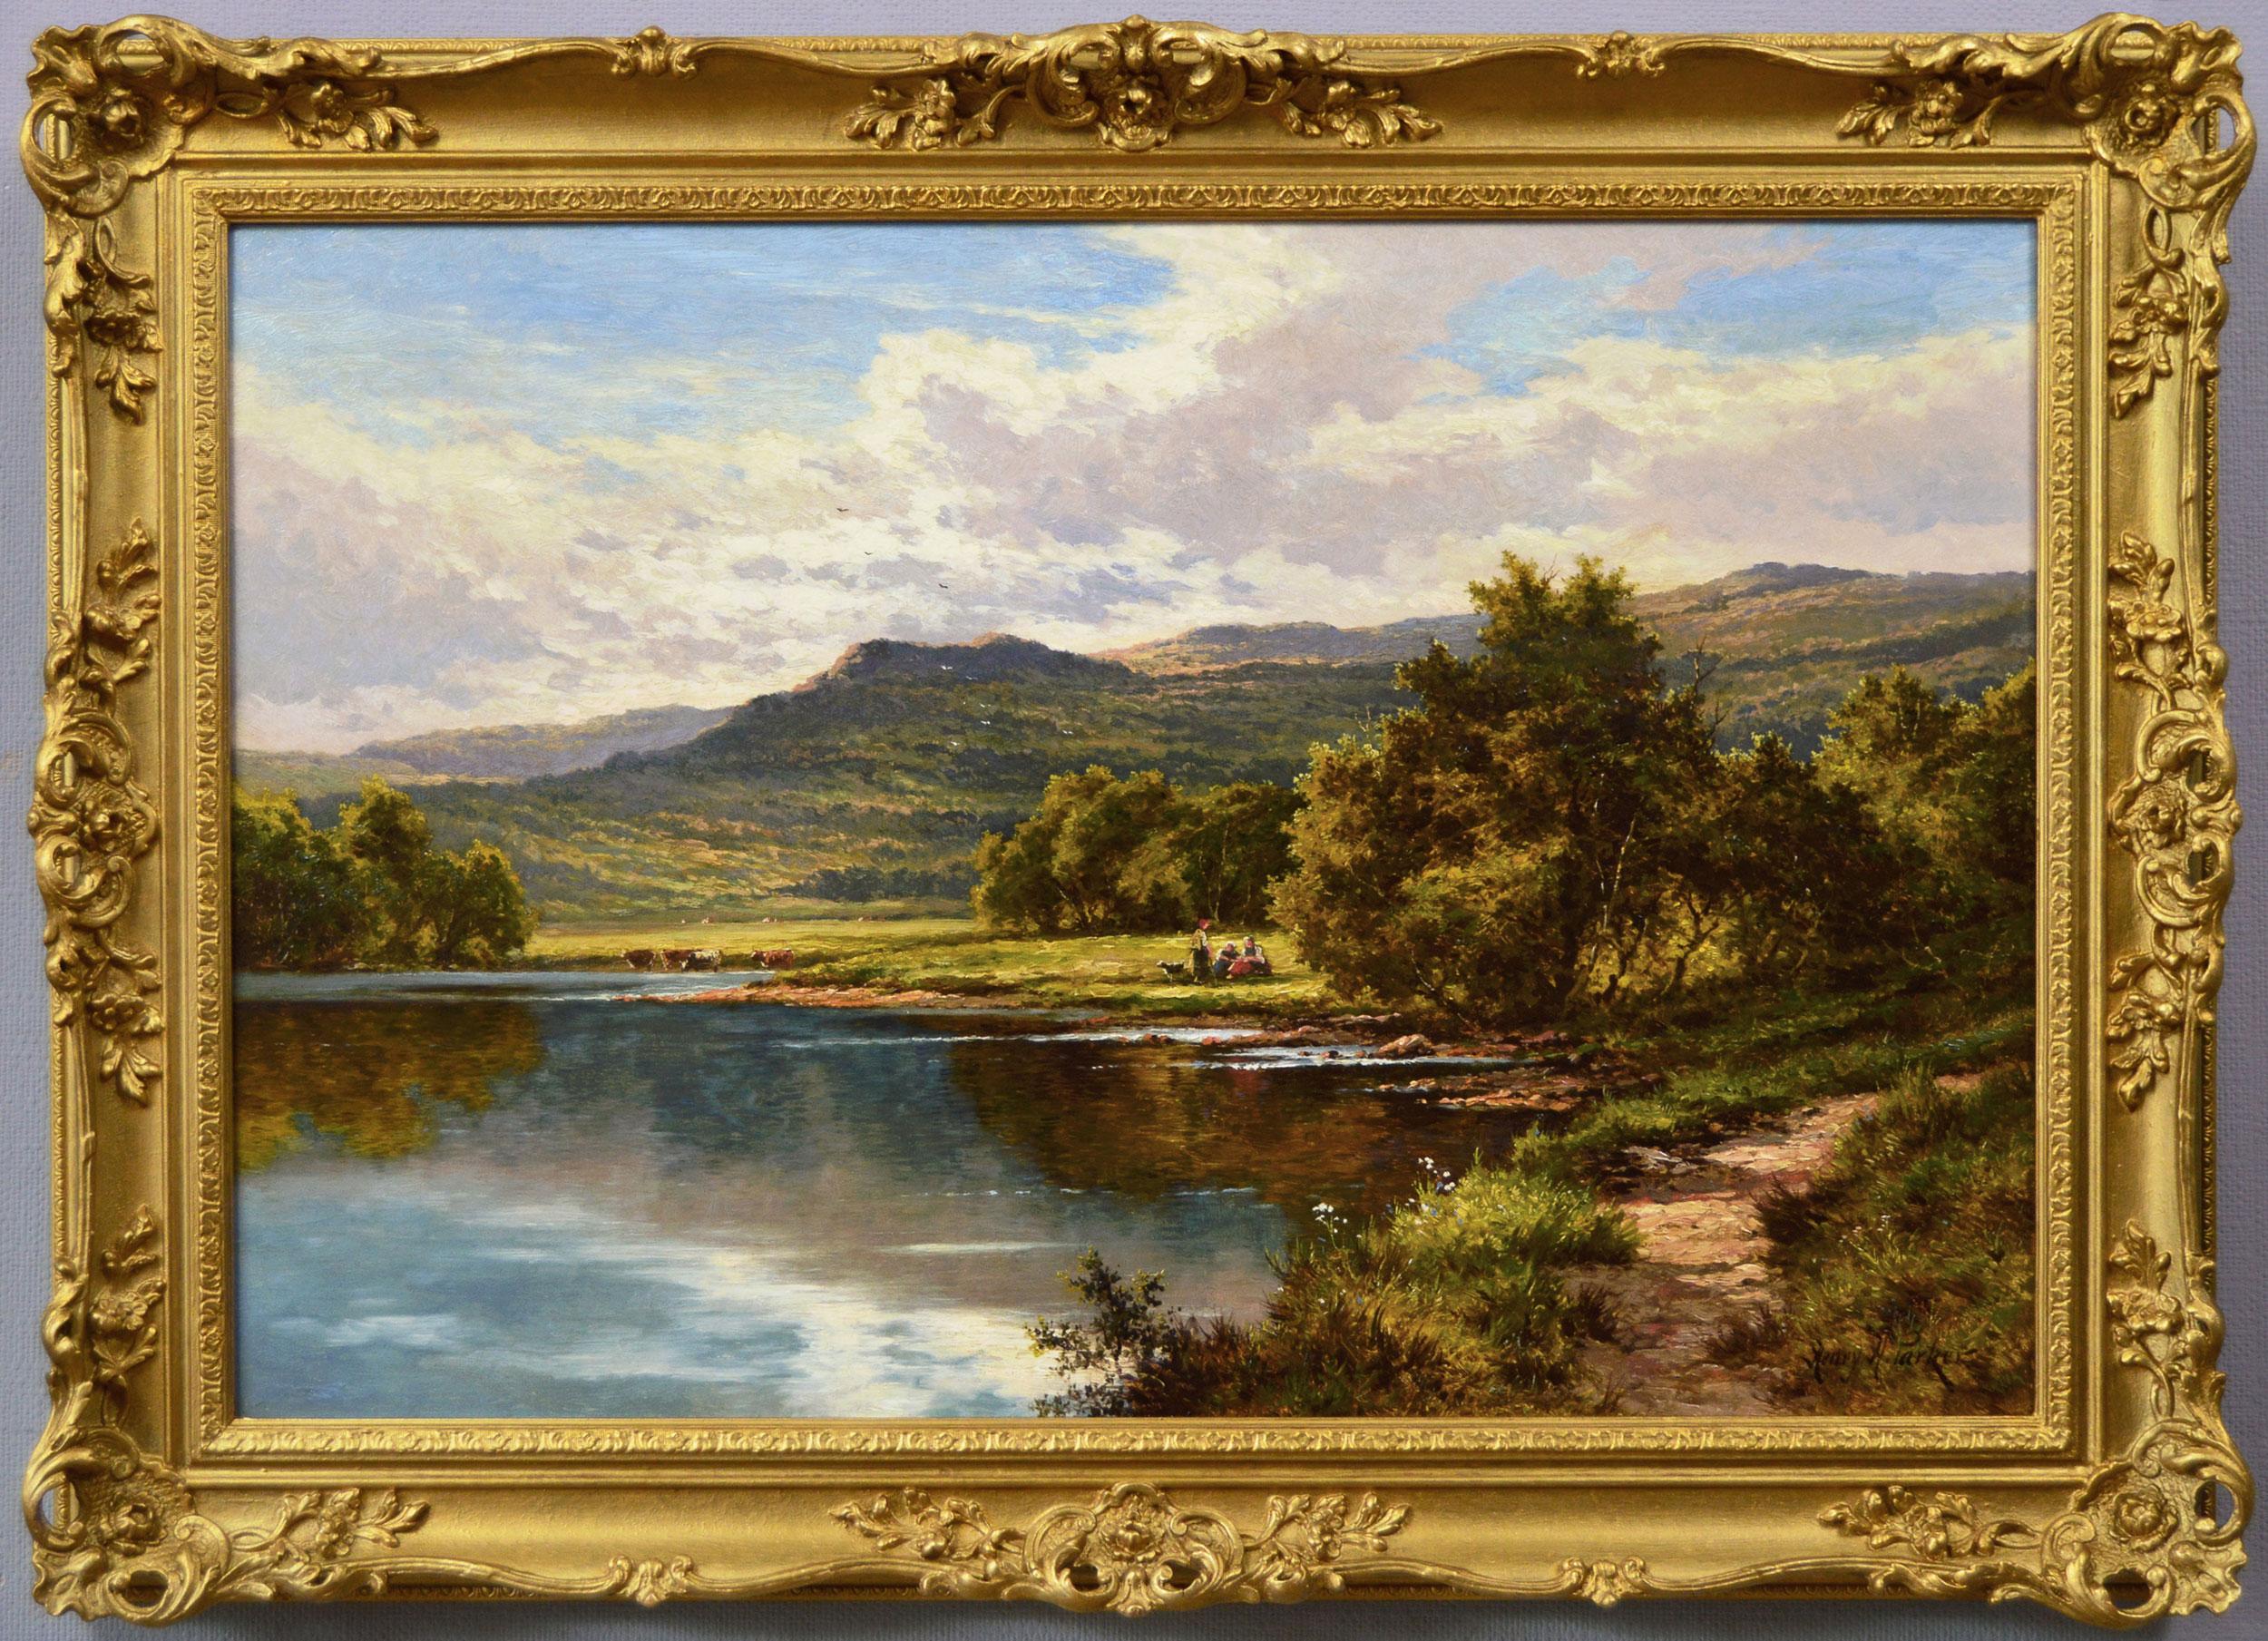 19th Century landscape oil painting of the river Lledr near Bettws-y-coed